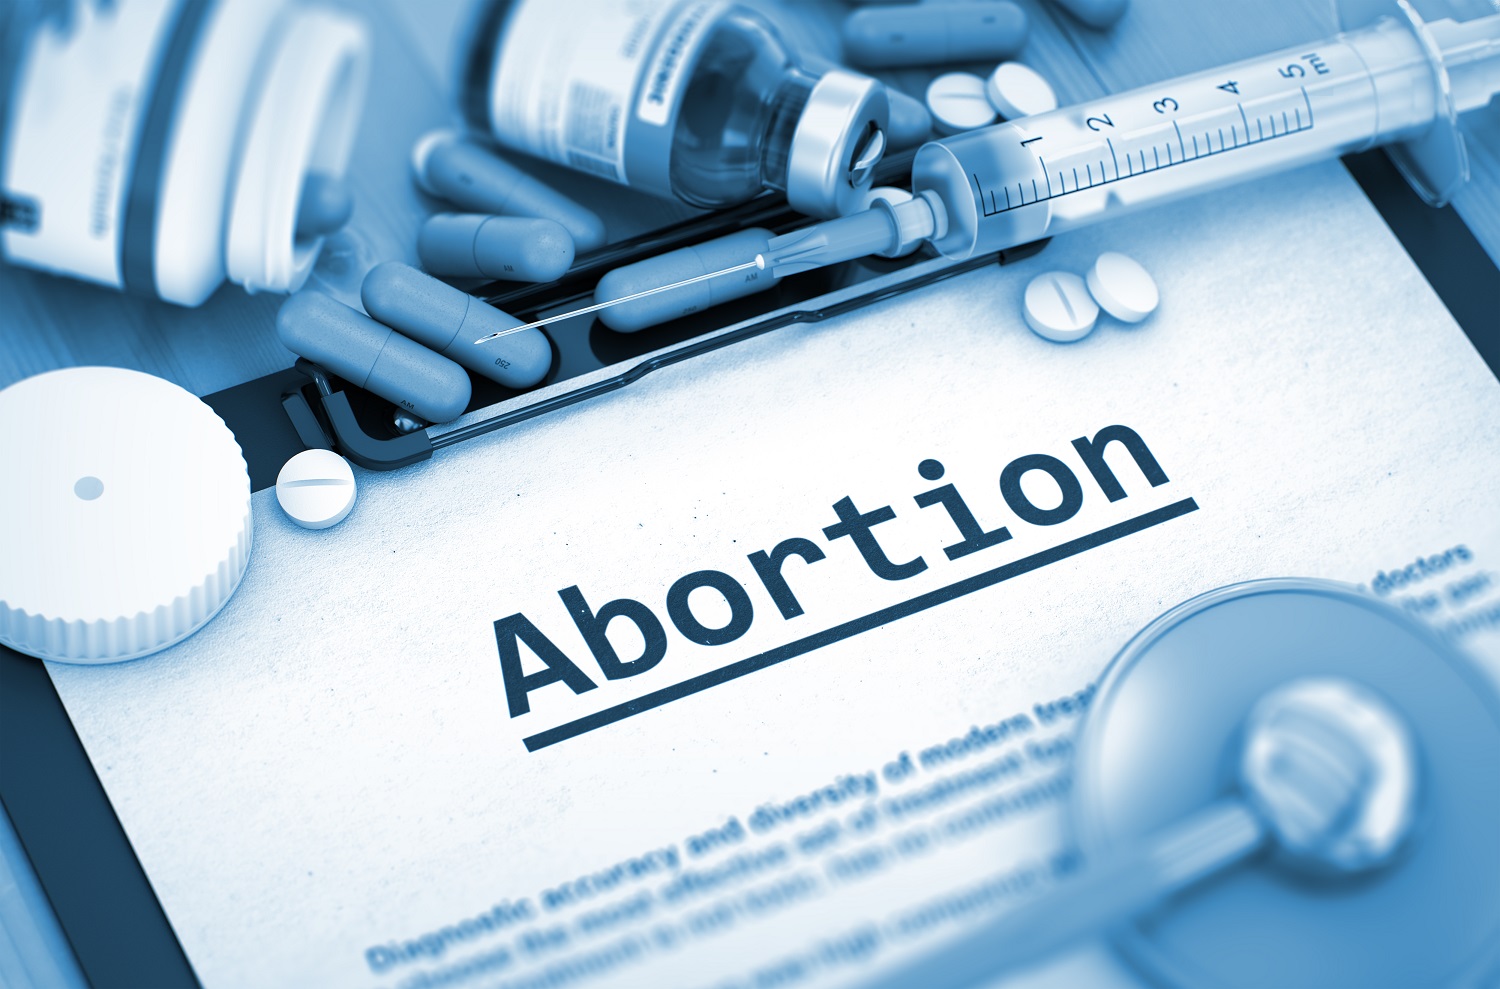 Government provides safe abortion within home services